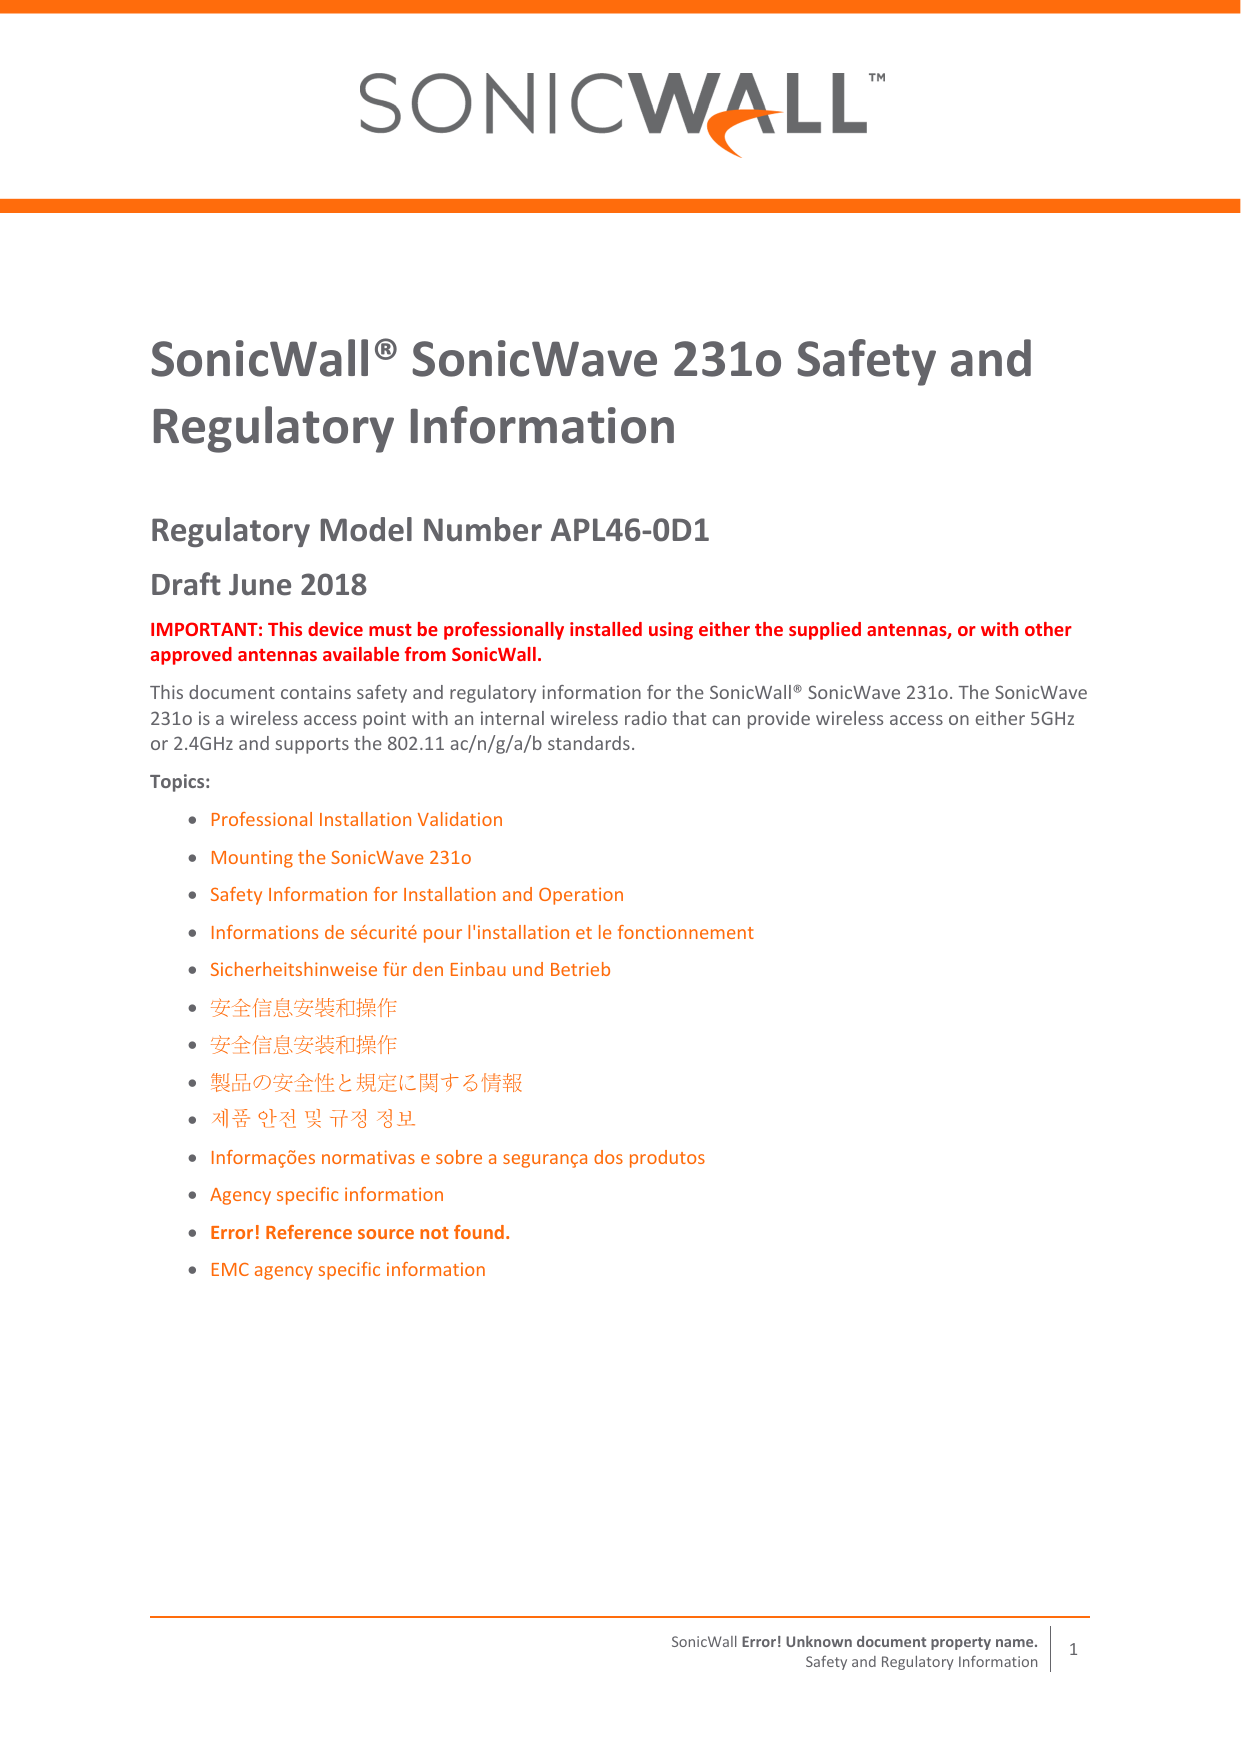   SonicWall Error! Unknown document property name. 1 Safety and Regulatory Information  SonicWall® SonicWave 231o Safety and Regulatory Information Regulatory Model Number APL46‐0D1 Draft June 2018 IMPORTANT: This device must be professionally installed using either the supplied antennas, or with other approved antennas available from SonicWall. This document contains safety and regulatory information for the SonicWall® SonicWave 231o. The SonicWave 231o is a wireless access point with an internal wireless radio that can provide wireless access on either 5GHz or 2.4GHz and supports the 802.11 ac/n/g/a/b standards.  Topics:  Professional Installation Validation  Mounting the SonicWave 231o  Safety Information for Installation and Operation  Informations de sécurité pour l&apos;installation et le fonctionnement   Sicherheitshinweise für den Einbau und Betrieb  安全信息安裝和操作    安全信息安装和操作   製品の安全性と規定に関する情報    제품 안전 및 규정 정보  Informações normativas e sobre a segurança dos produtos  Agency specific information  Error! Reference source not found.  EMC agency specific information   